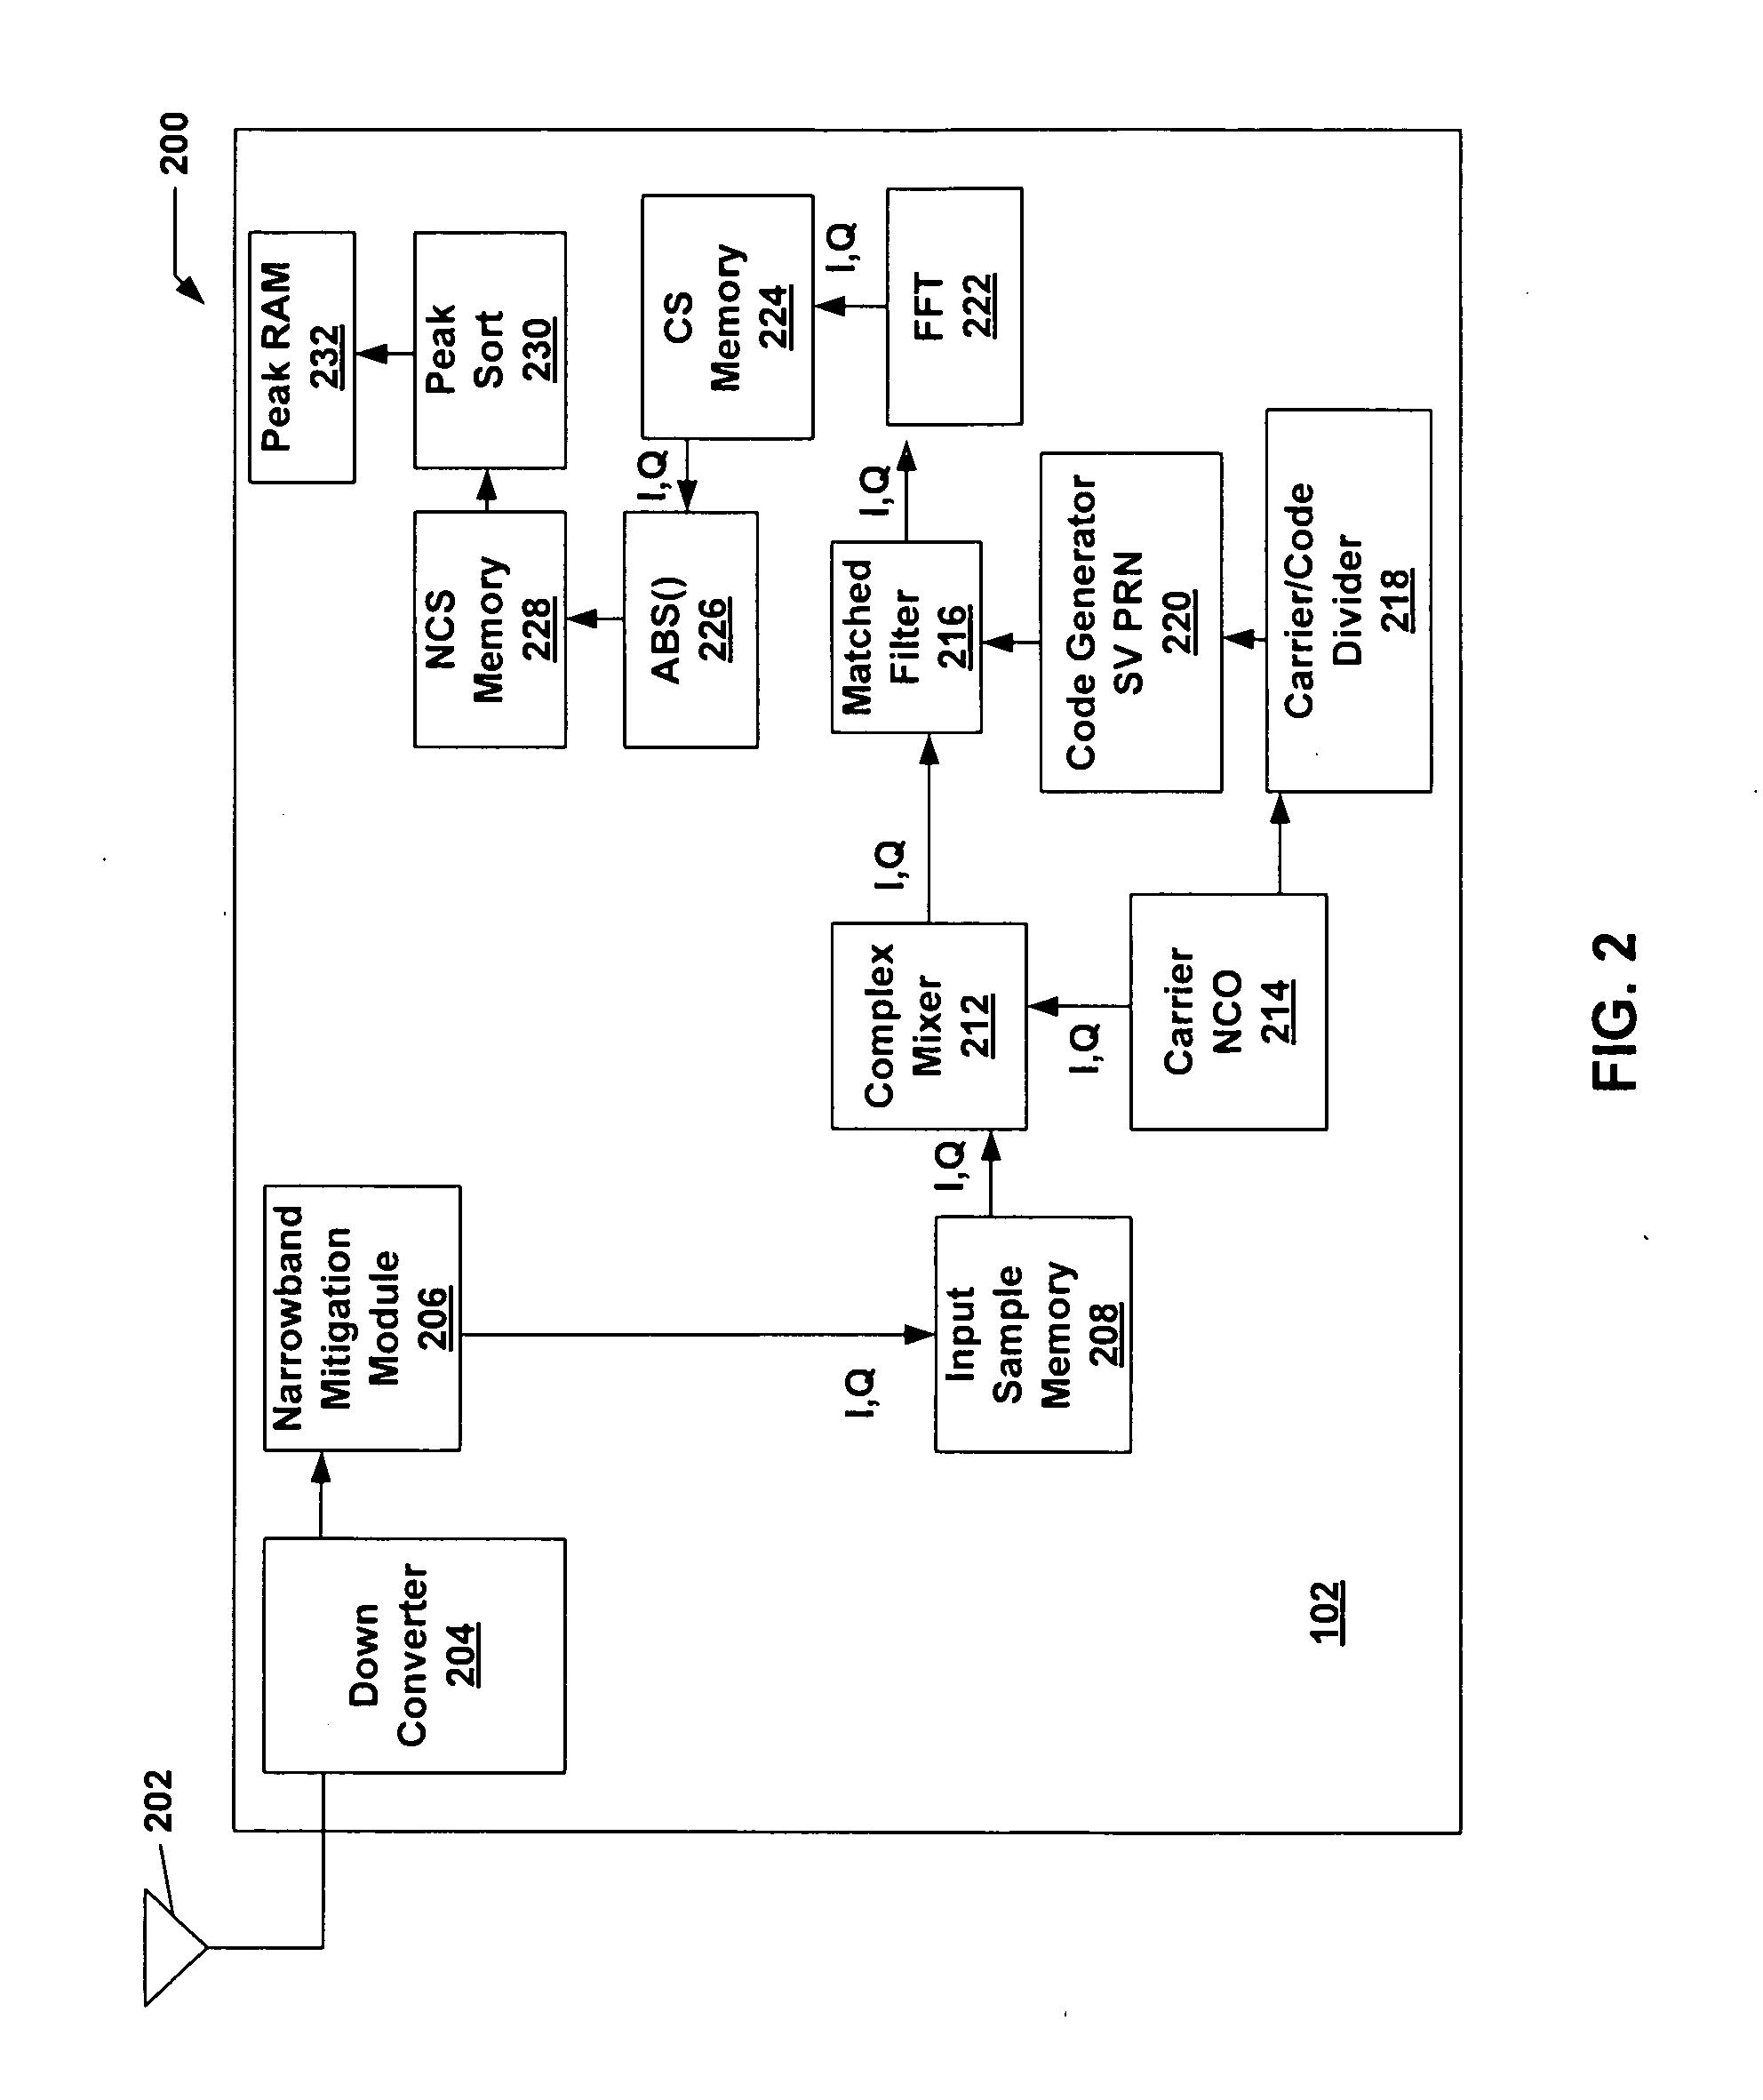 Method and Apparatus for Mitigating the Effects of Narrowband Interfering Signals in a GPS Receiver